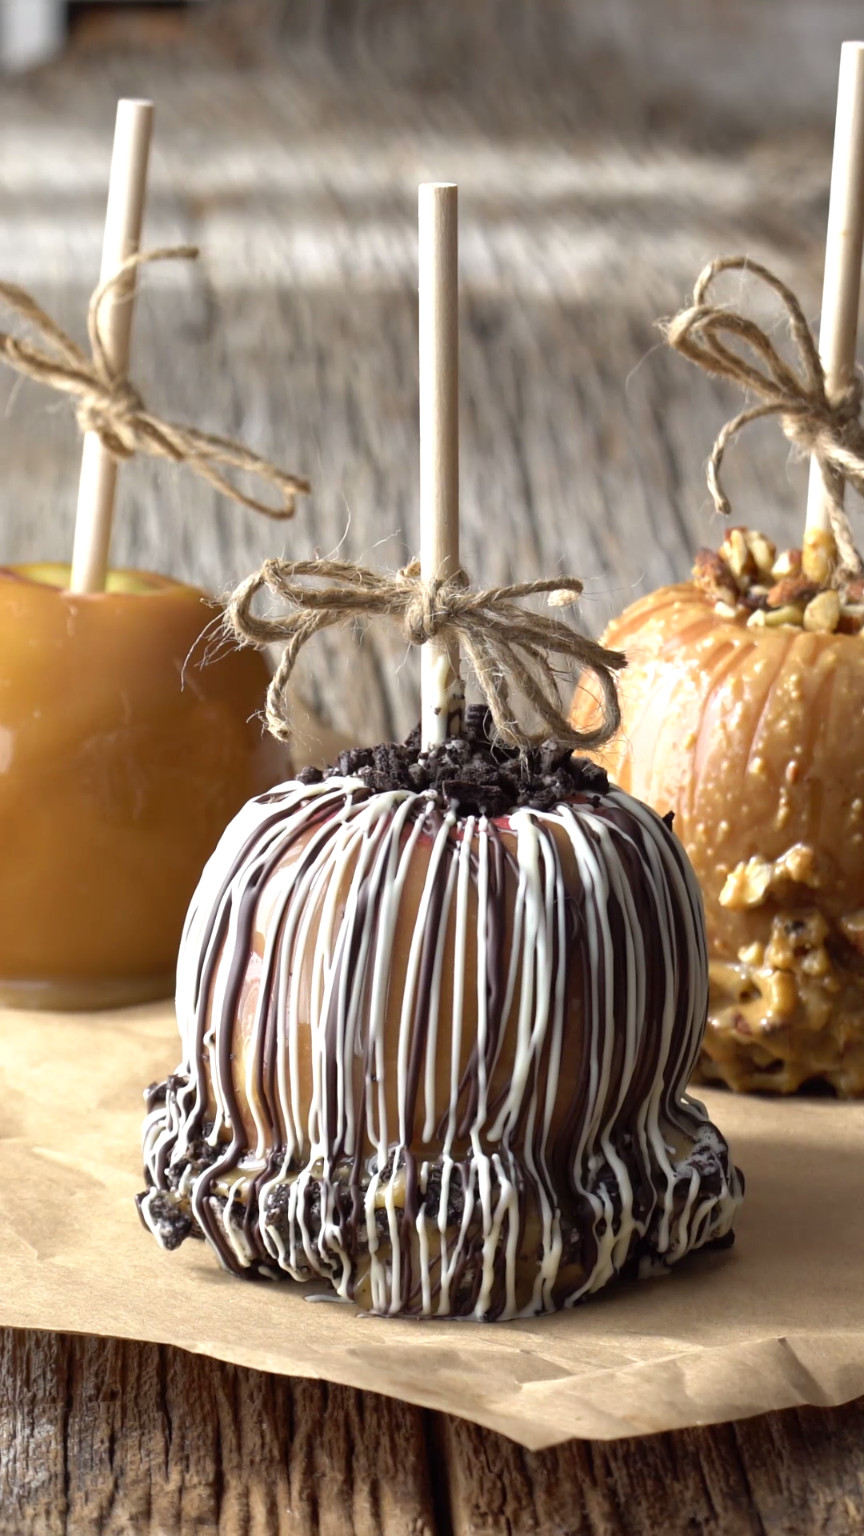 Gourmet Candy Apple Recipes
 Over the Top Caramel Apples Recipe